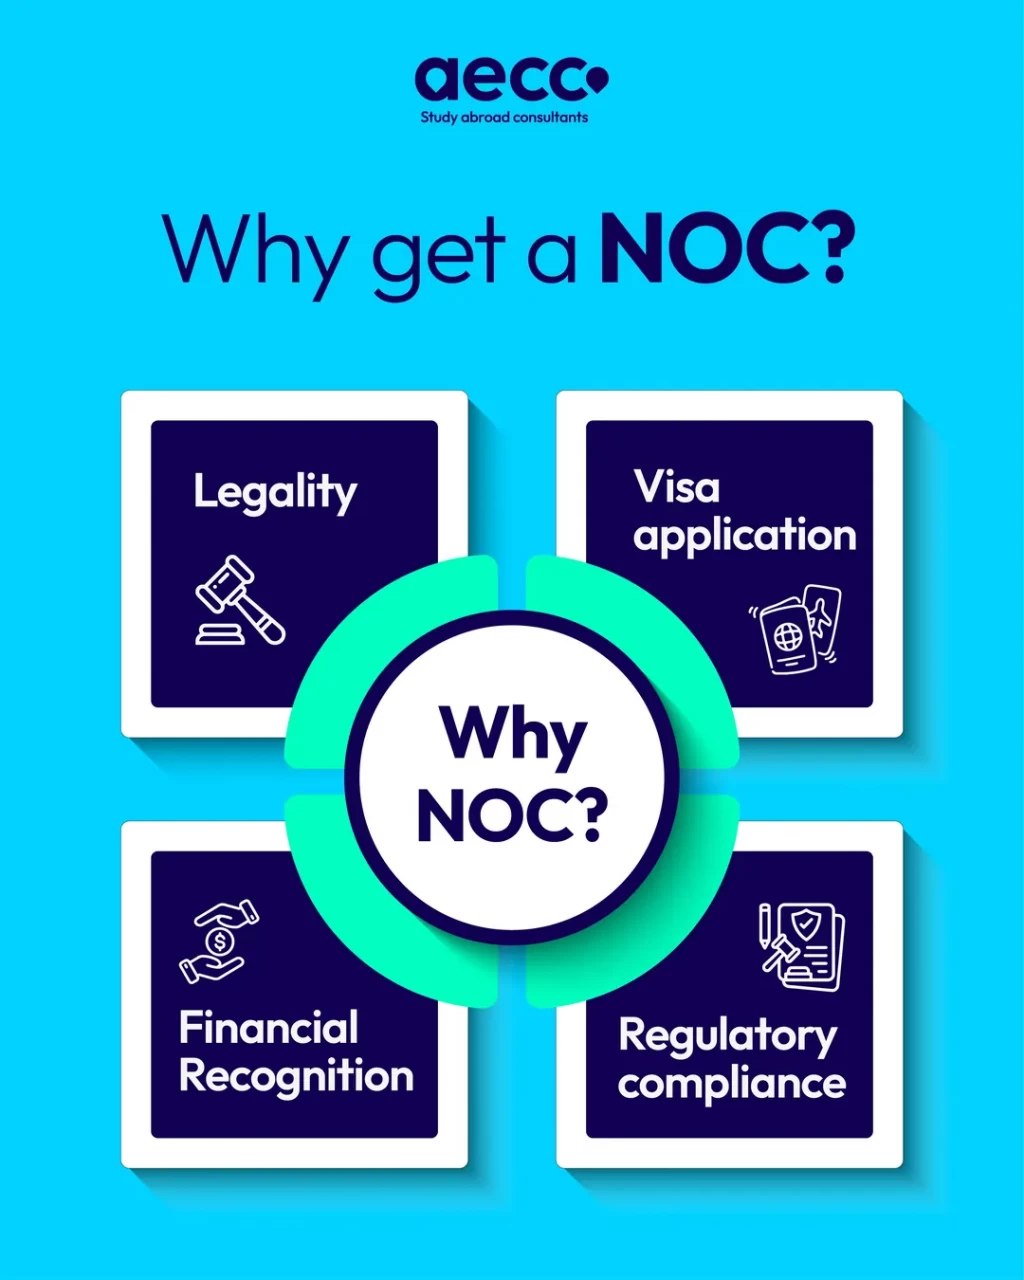 Why get an NOC?